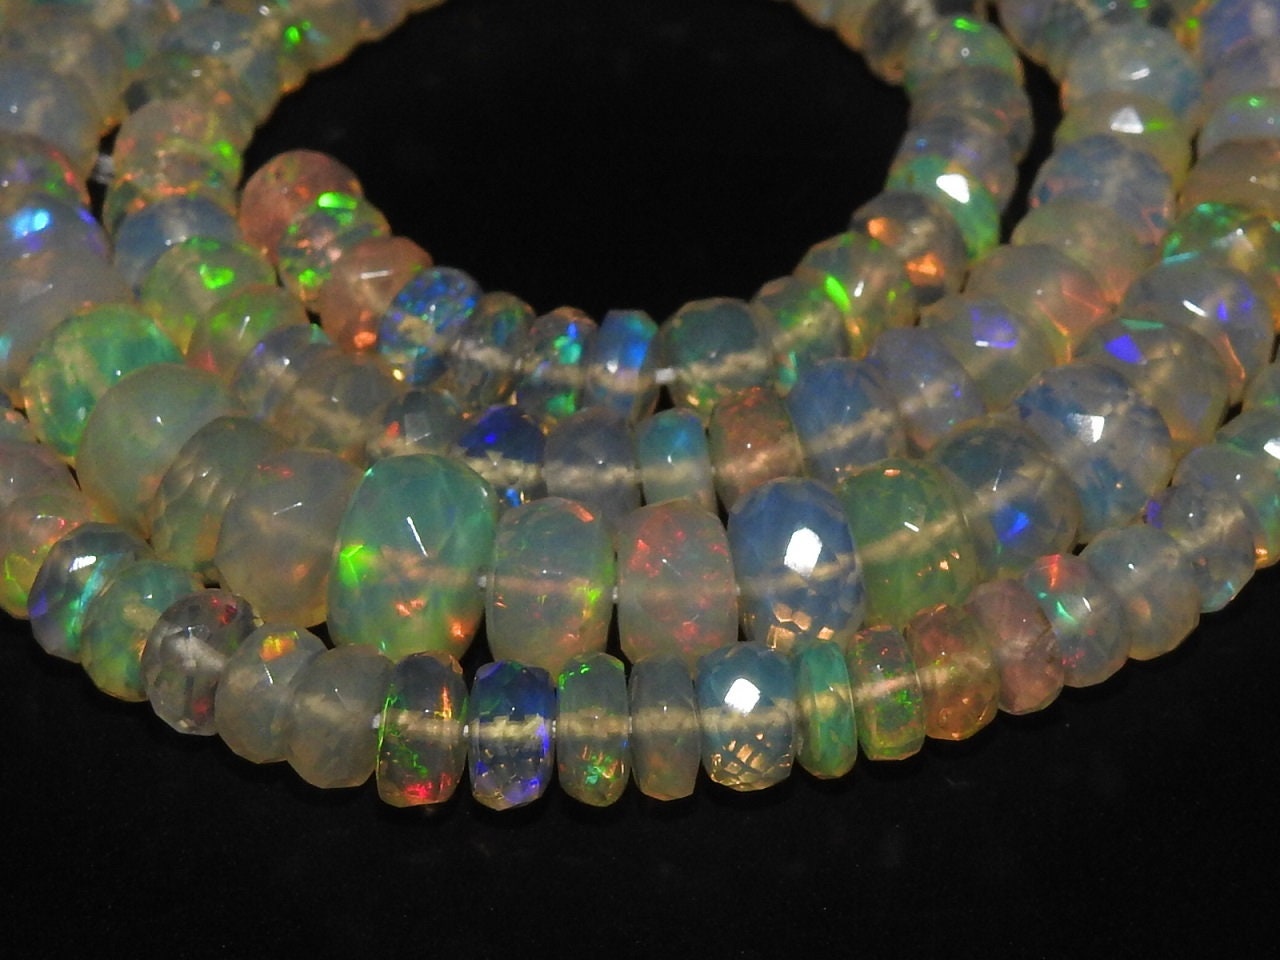 Ethiopian Opal Faceted Roundel Beads,Loose Stone,Multi Fire,Handmade,For Making Jewelry,4To6MM Approx,Wholesaler,Supplies,100%NaturalPME-EO2 | Save 33% - Rajasthan Living 14